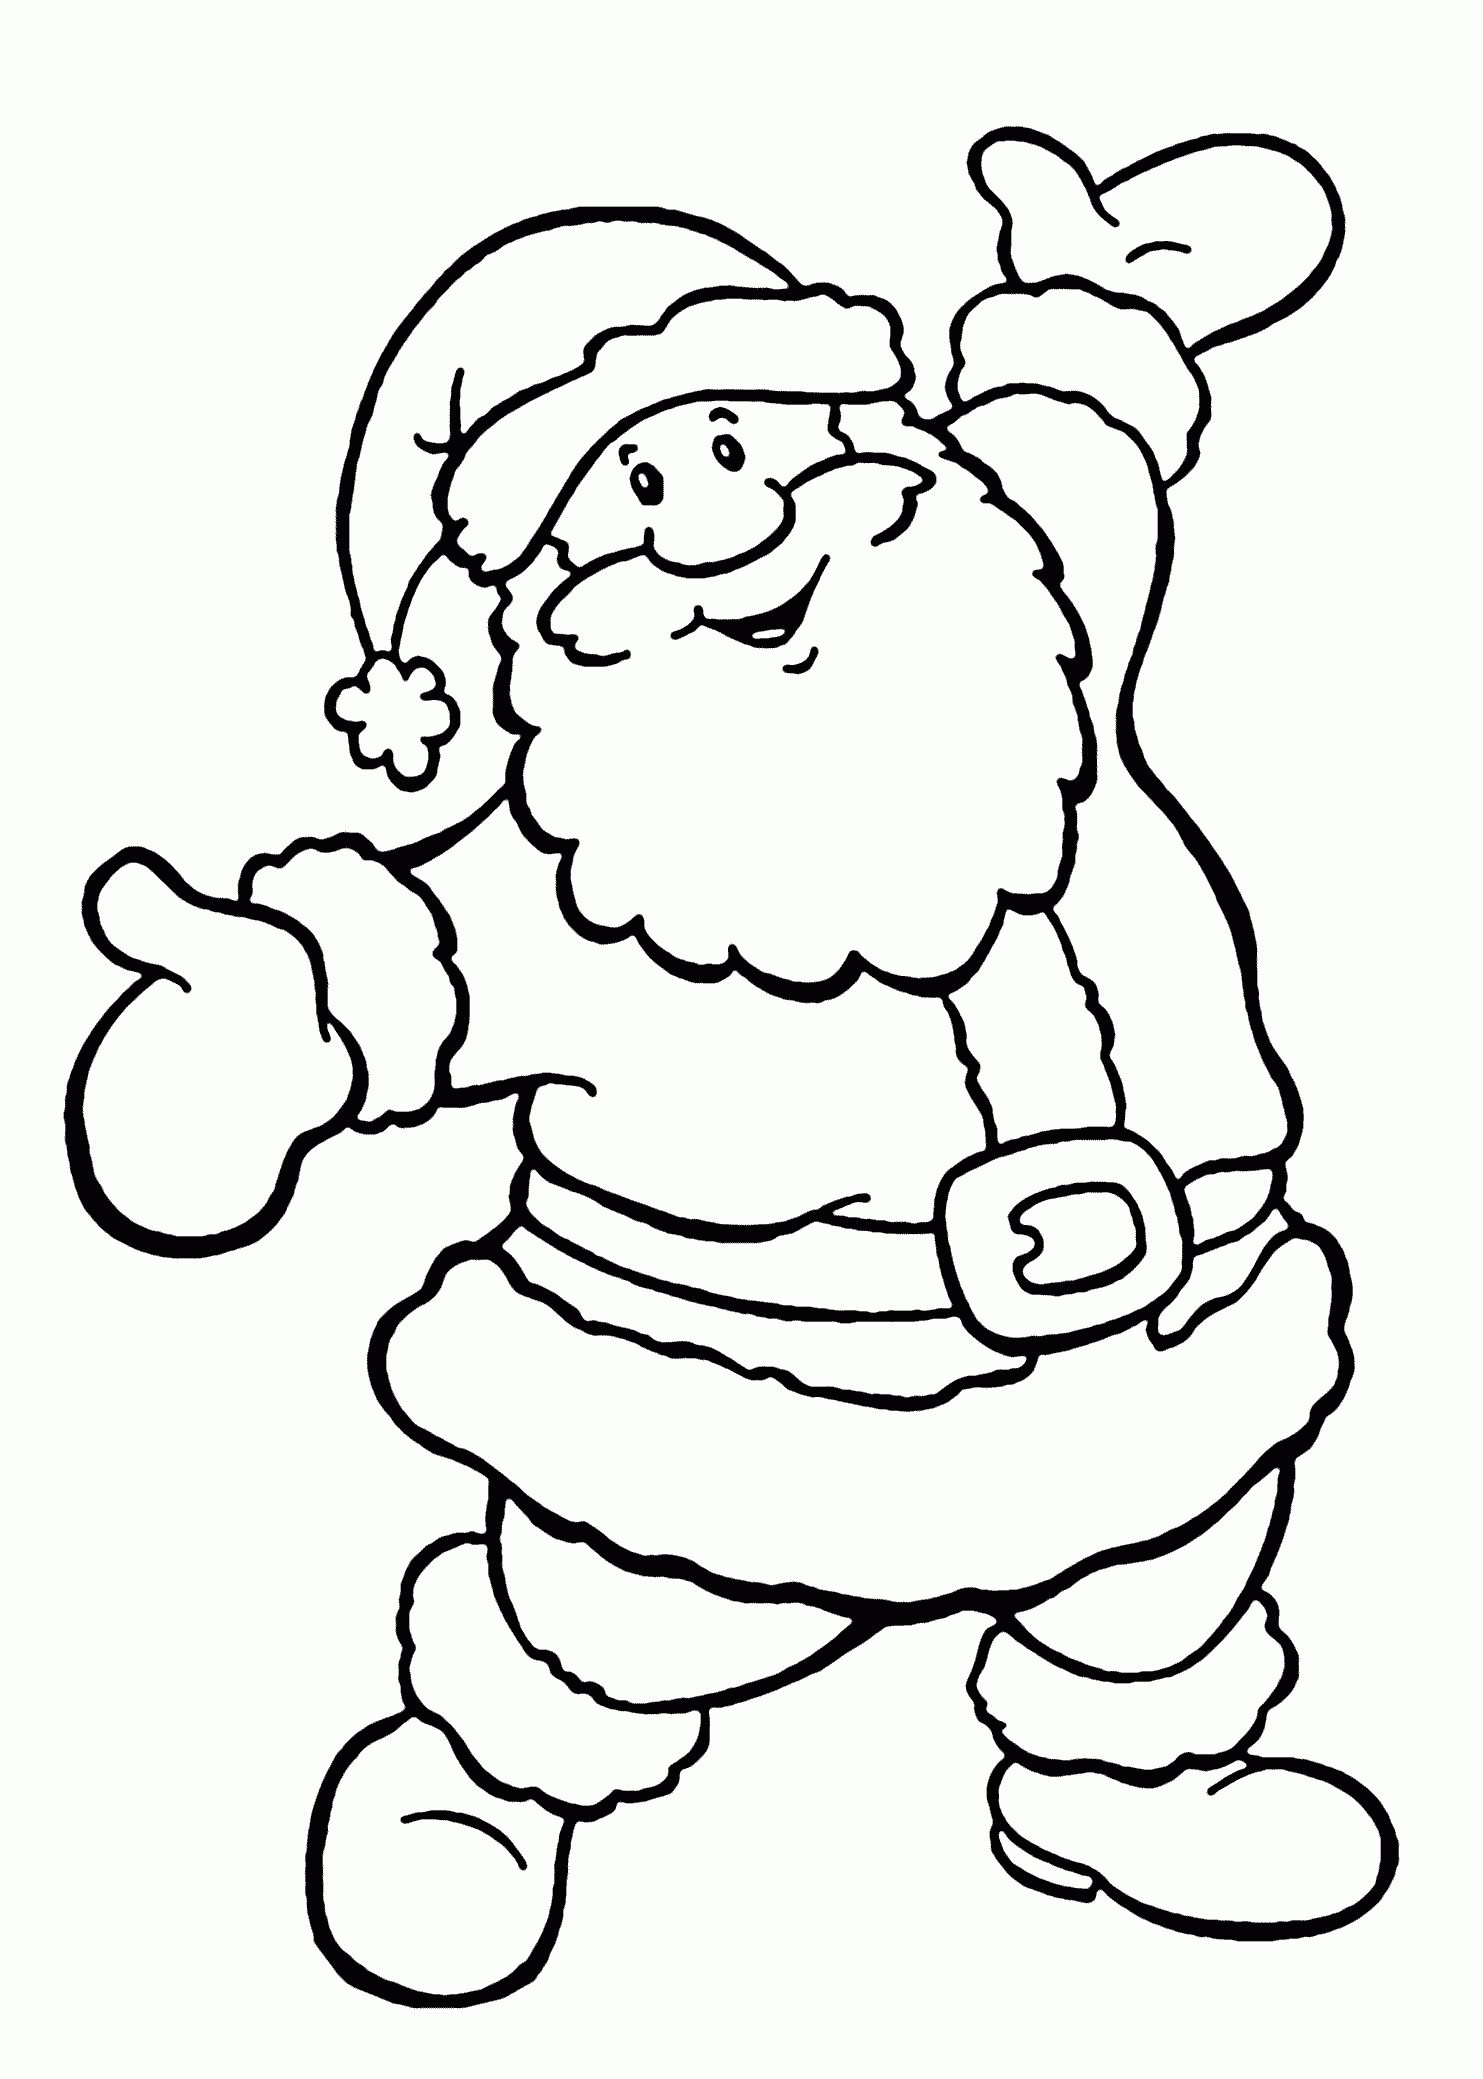 Happy Santa Coloring Pages For Kids, Printable Free | Ugly Sweater - Santa Coloring Pages Printable Free